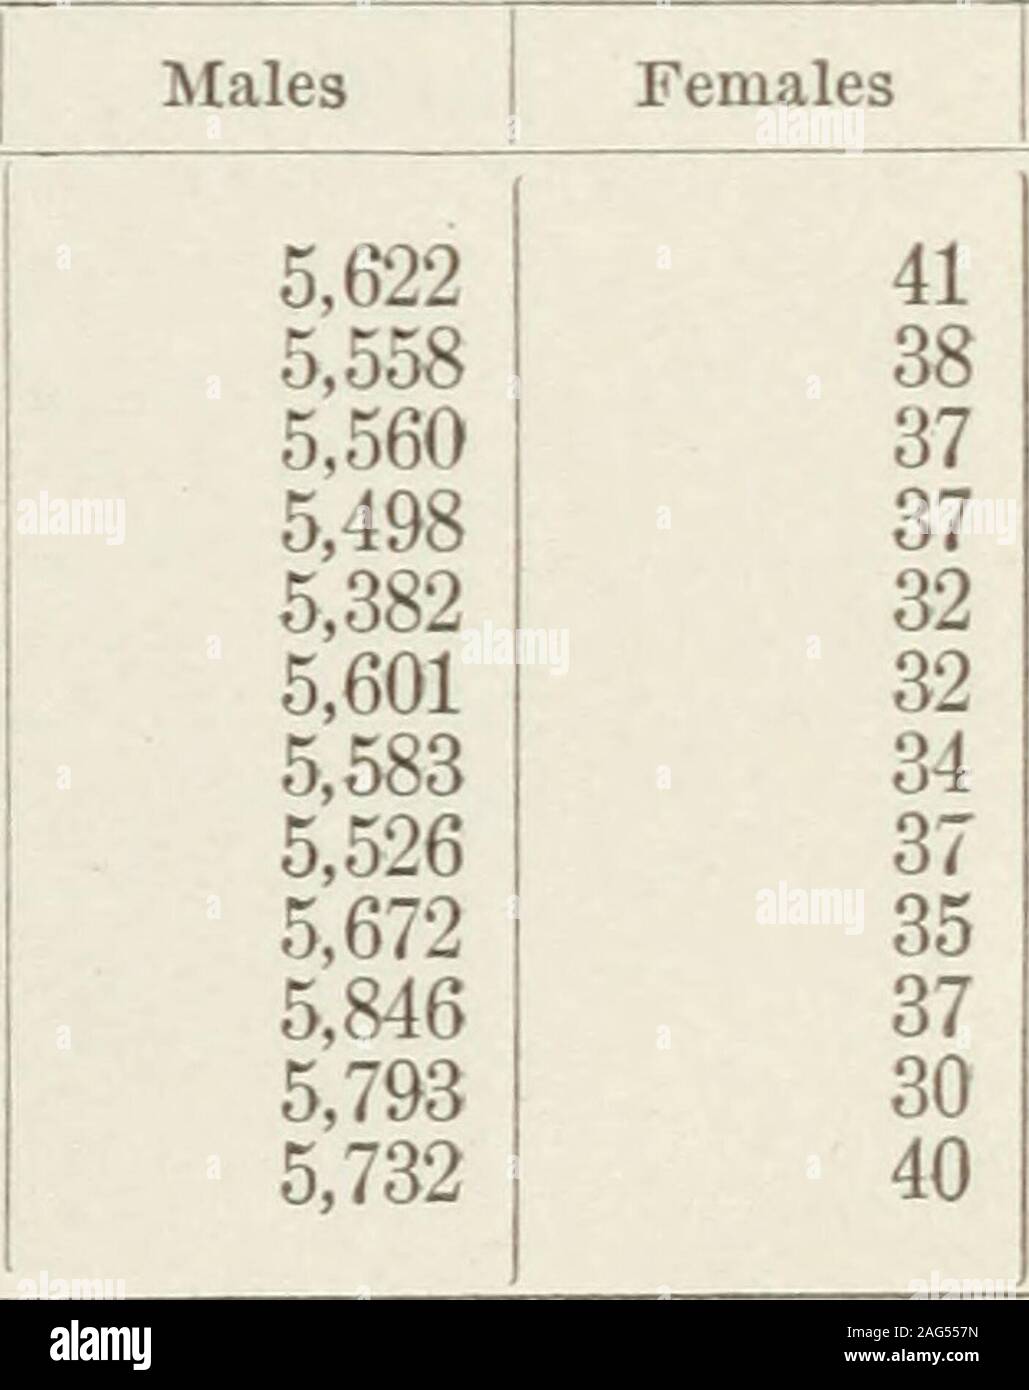 . Appendix to the Journals of the Senate and Assembly of the ... session of the Legislature of the State of California. stenographers, salesmen, etc.:18 years of age and over _ _ _ _ __ __ _ _ 185 Under 18 years of age _ _ Totals -- _- - 1,506 185 Wage earners:18 years of age and over _ 5,63934 40 Under 18 years of age _ _ _ __ __ _ Totals - 5,673 40 Salary and wage payments—annual:Officers, superintendents and managers. Clerks, stenographers, salesmen, etc Wage earners (including piece workers). $630,5311,844,0655,920,576 Total $8,395,172 Weekly Wage Rates of Wage Earners. 18 years of age and Stock Photo